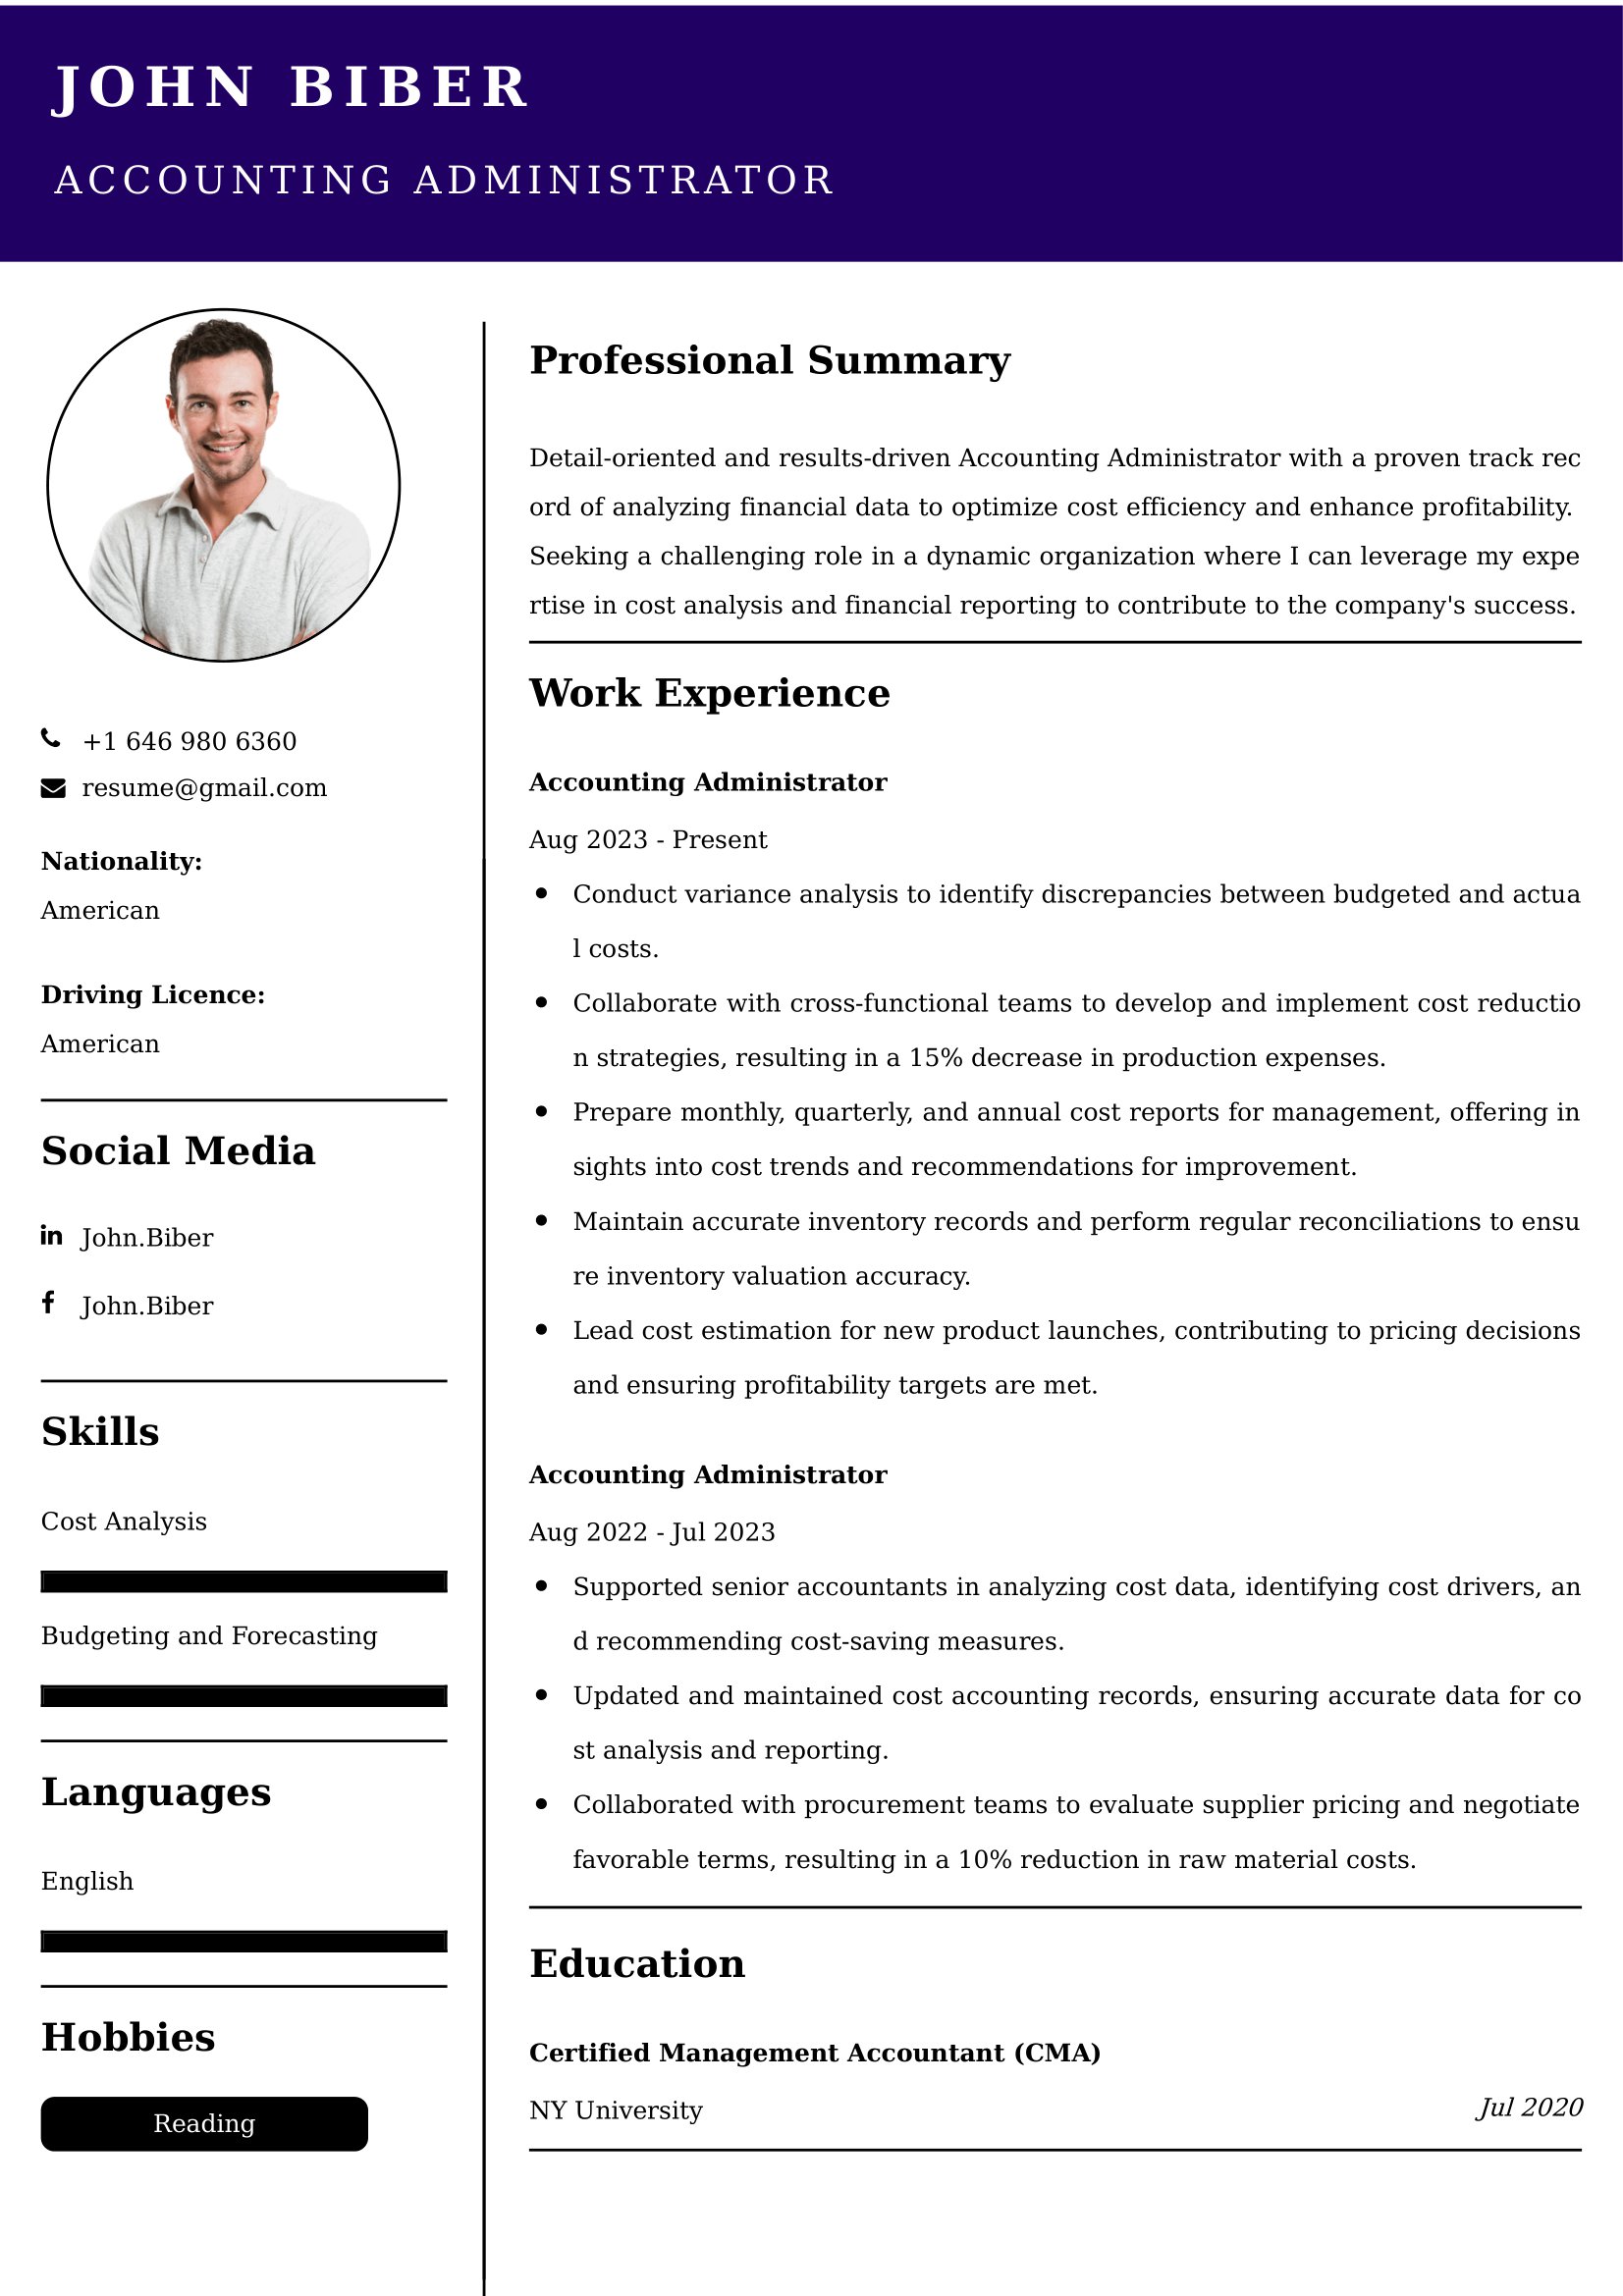 Accounting Administrator Resume Examples - Australian Format and Tips